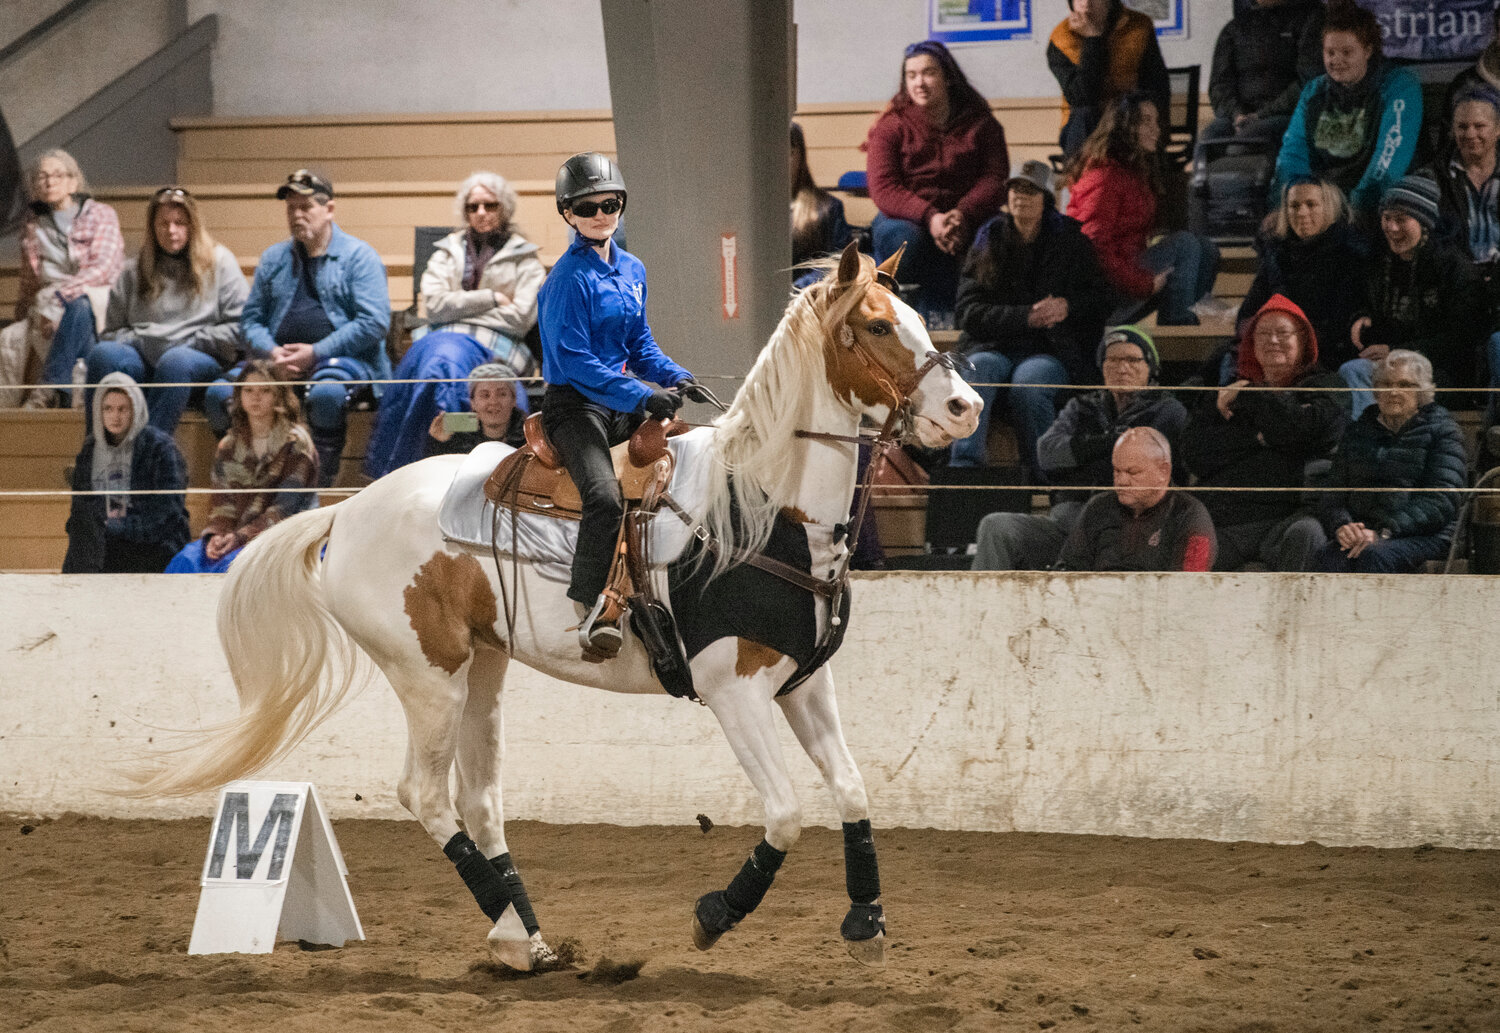 Hockinson freshman Liz Connors rounds a corner as the crowd smiles at her costumed horse during a “working pairs” performance in Tacoma on Saturday, April 15 for the team’s final district meet of the season.